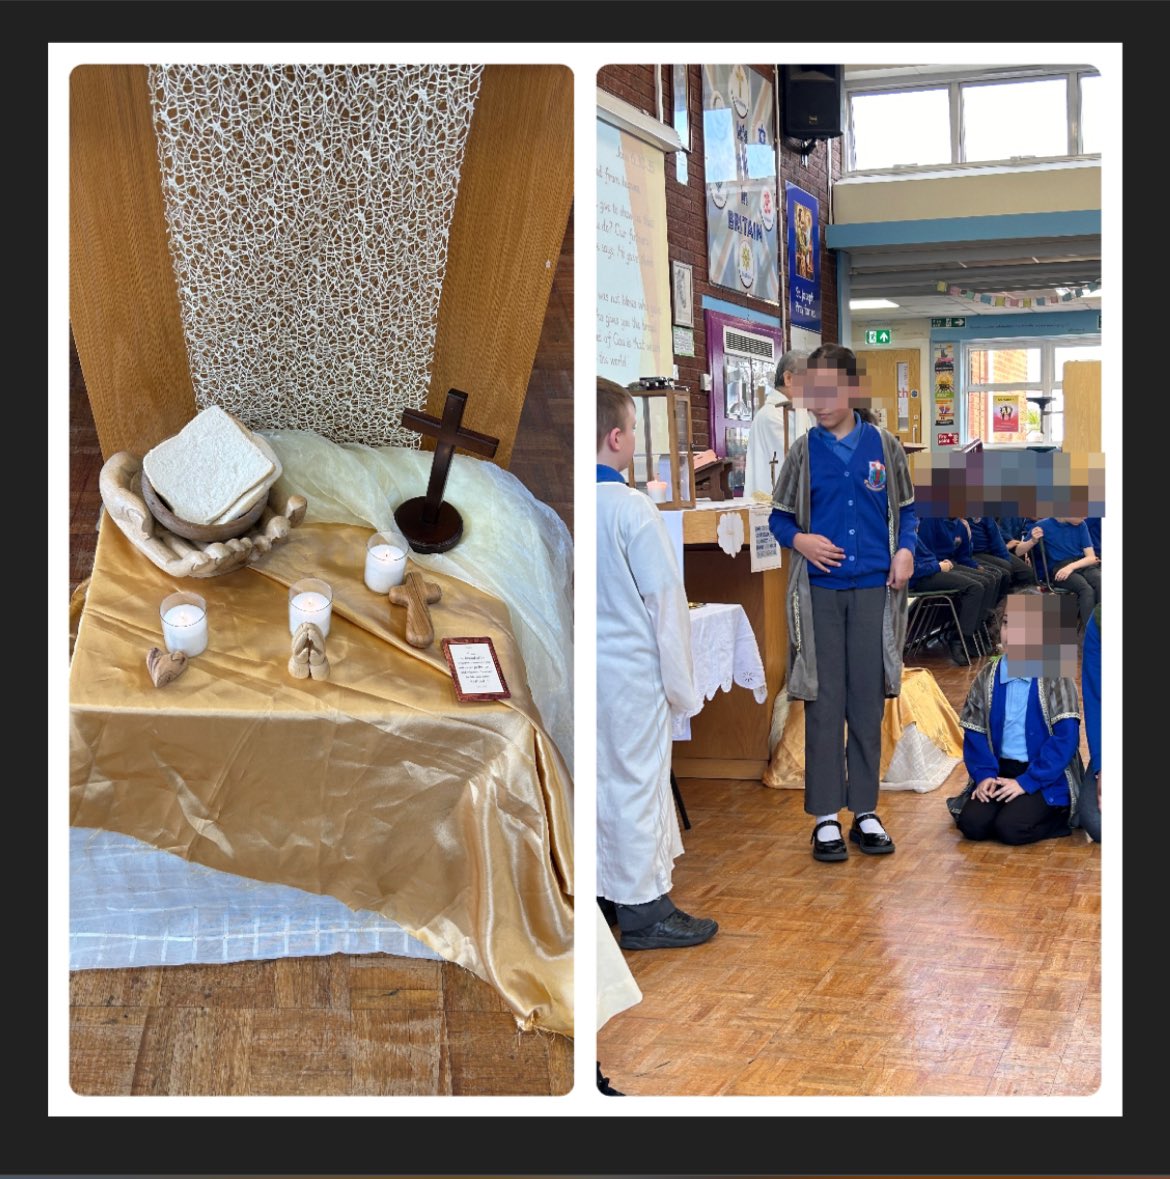 Thank you to Year 4 who led our whole school Mass today. Beautiful acting, reading and music to make our worship so very reverent and faith-filled.@StJohnBoscoCA